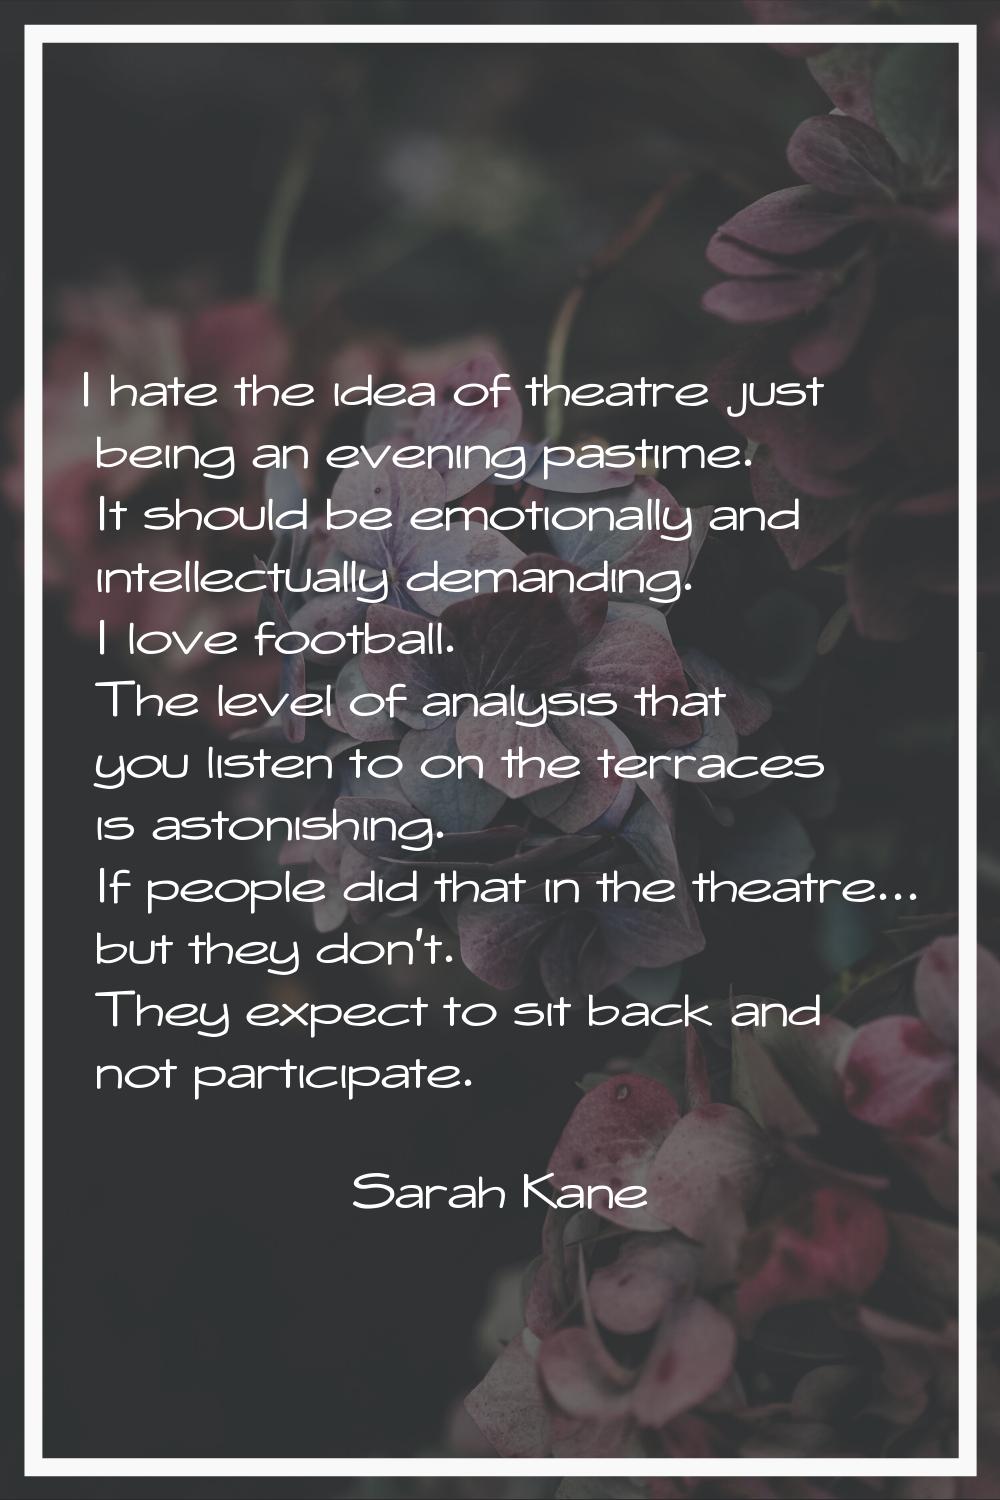 I hate the idea of theatre just being an evening pastime. It should be emotionally and intellectual